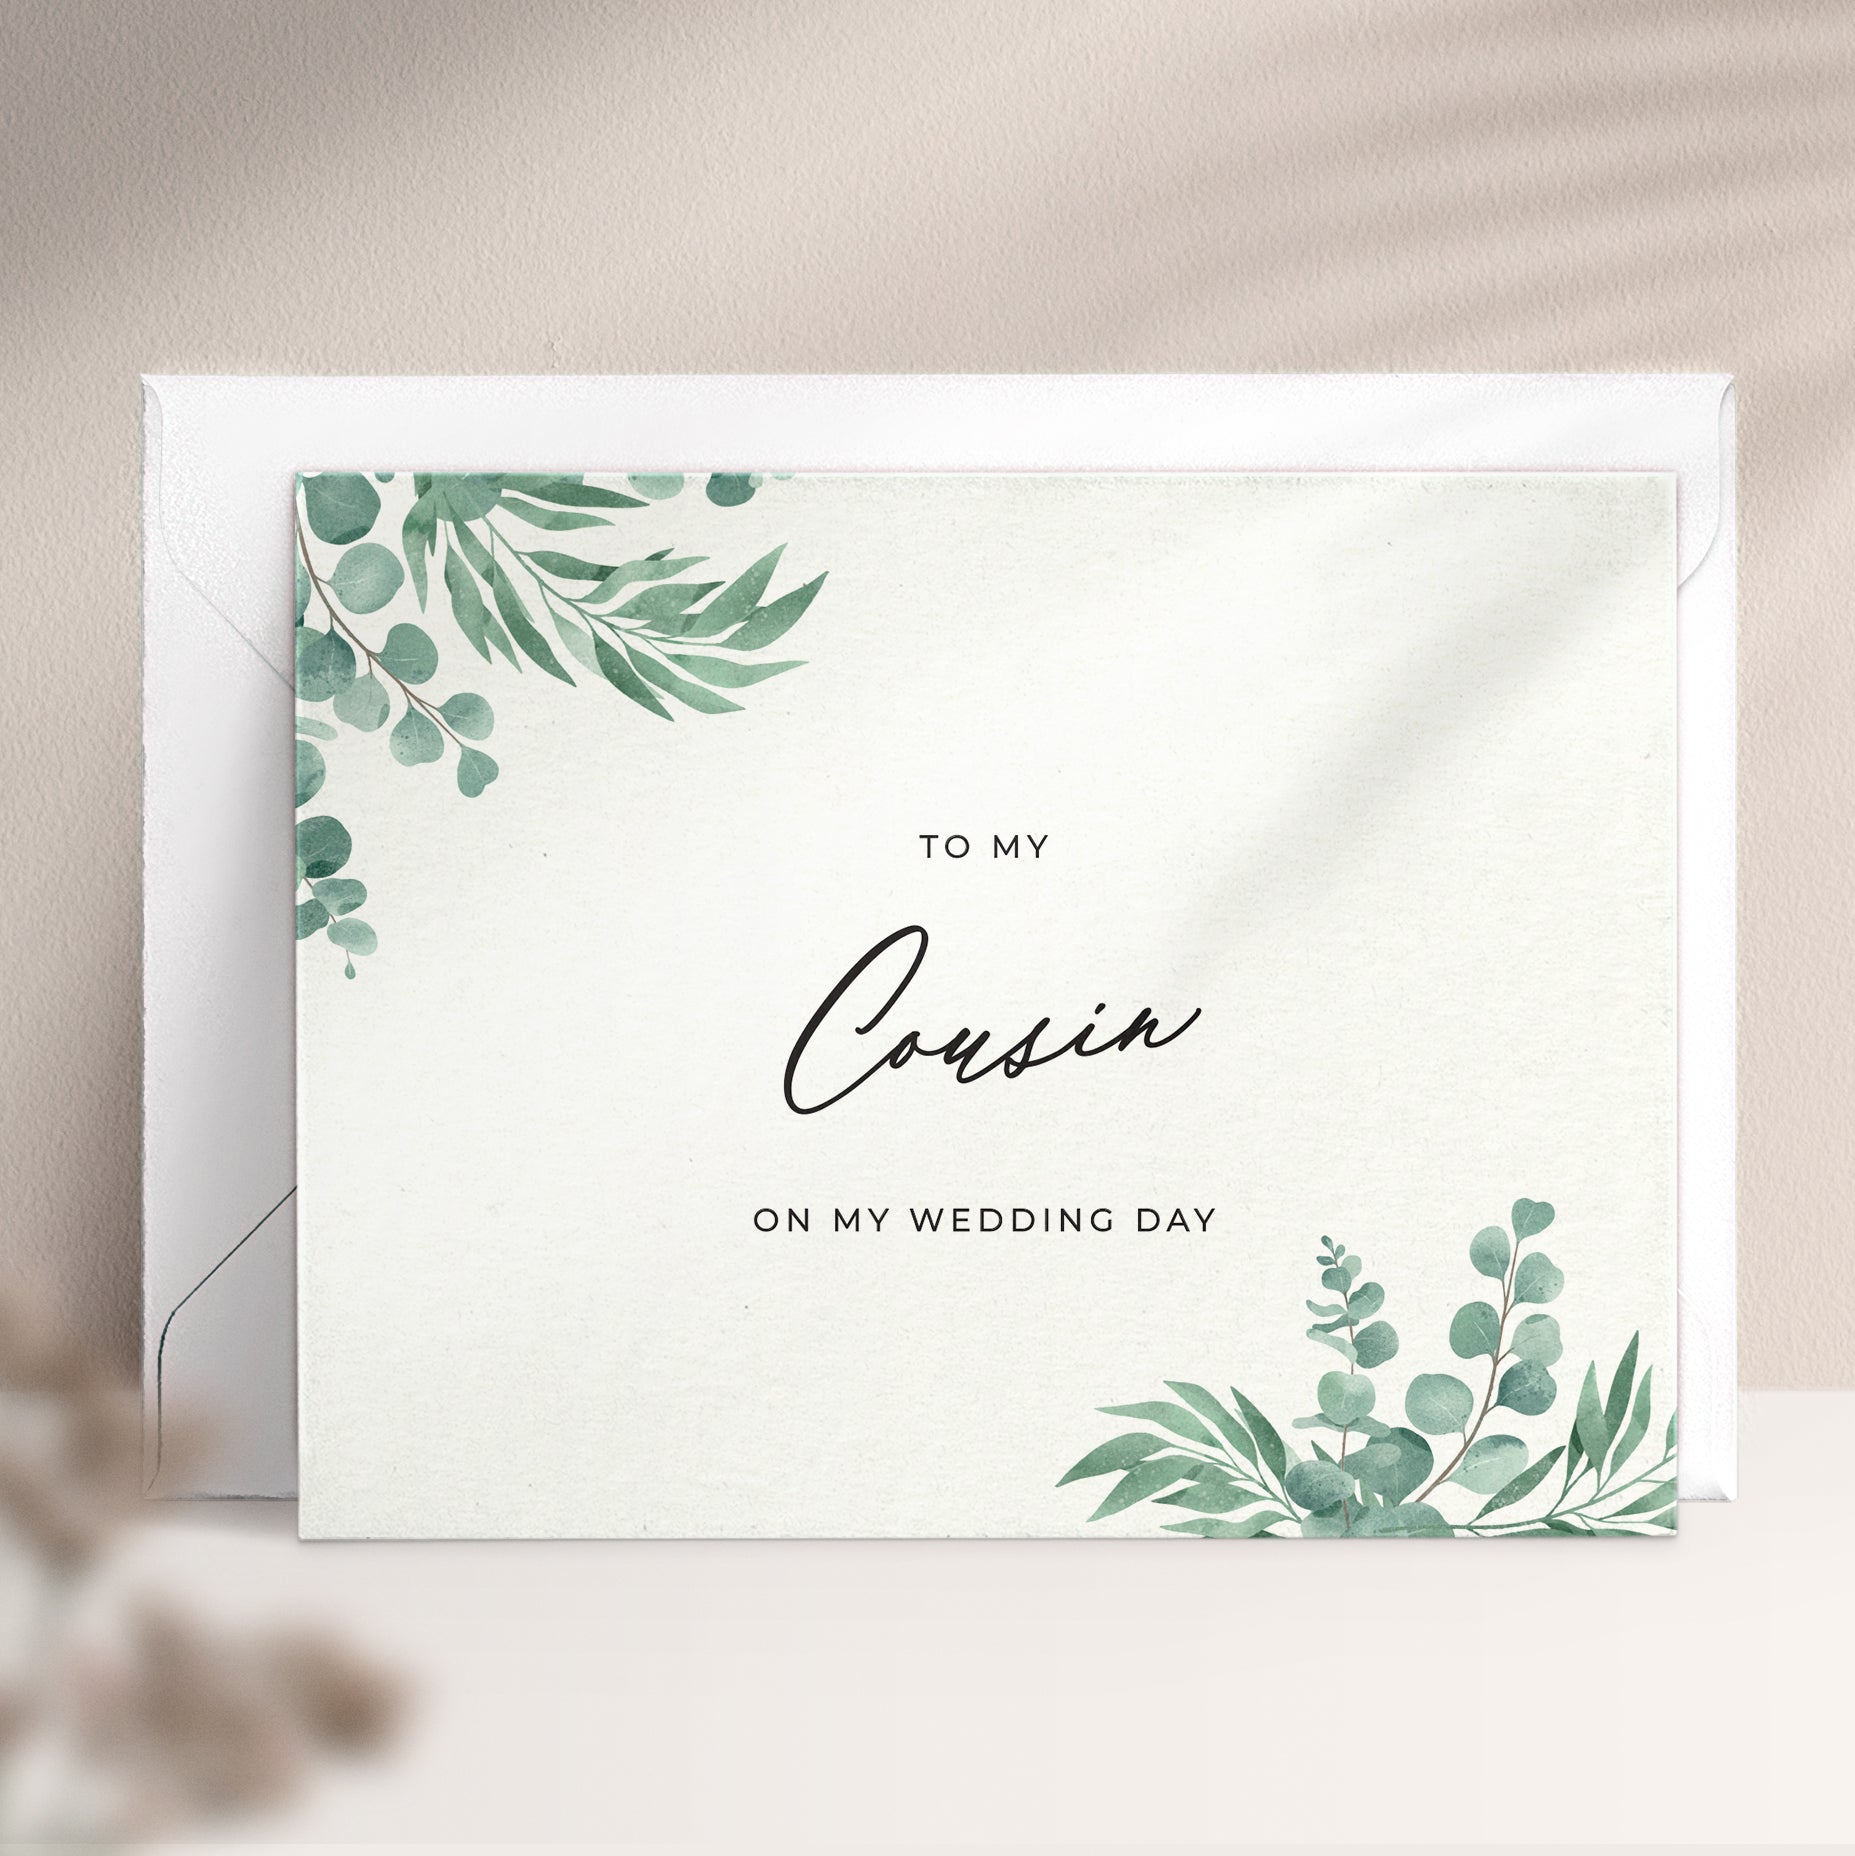 To my cousin on my wedding day note card in greenery design with eucalyptus leaves and calligraphy font from XOXOKristen.